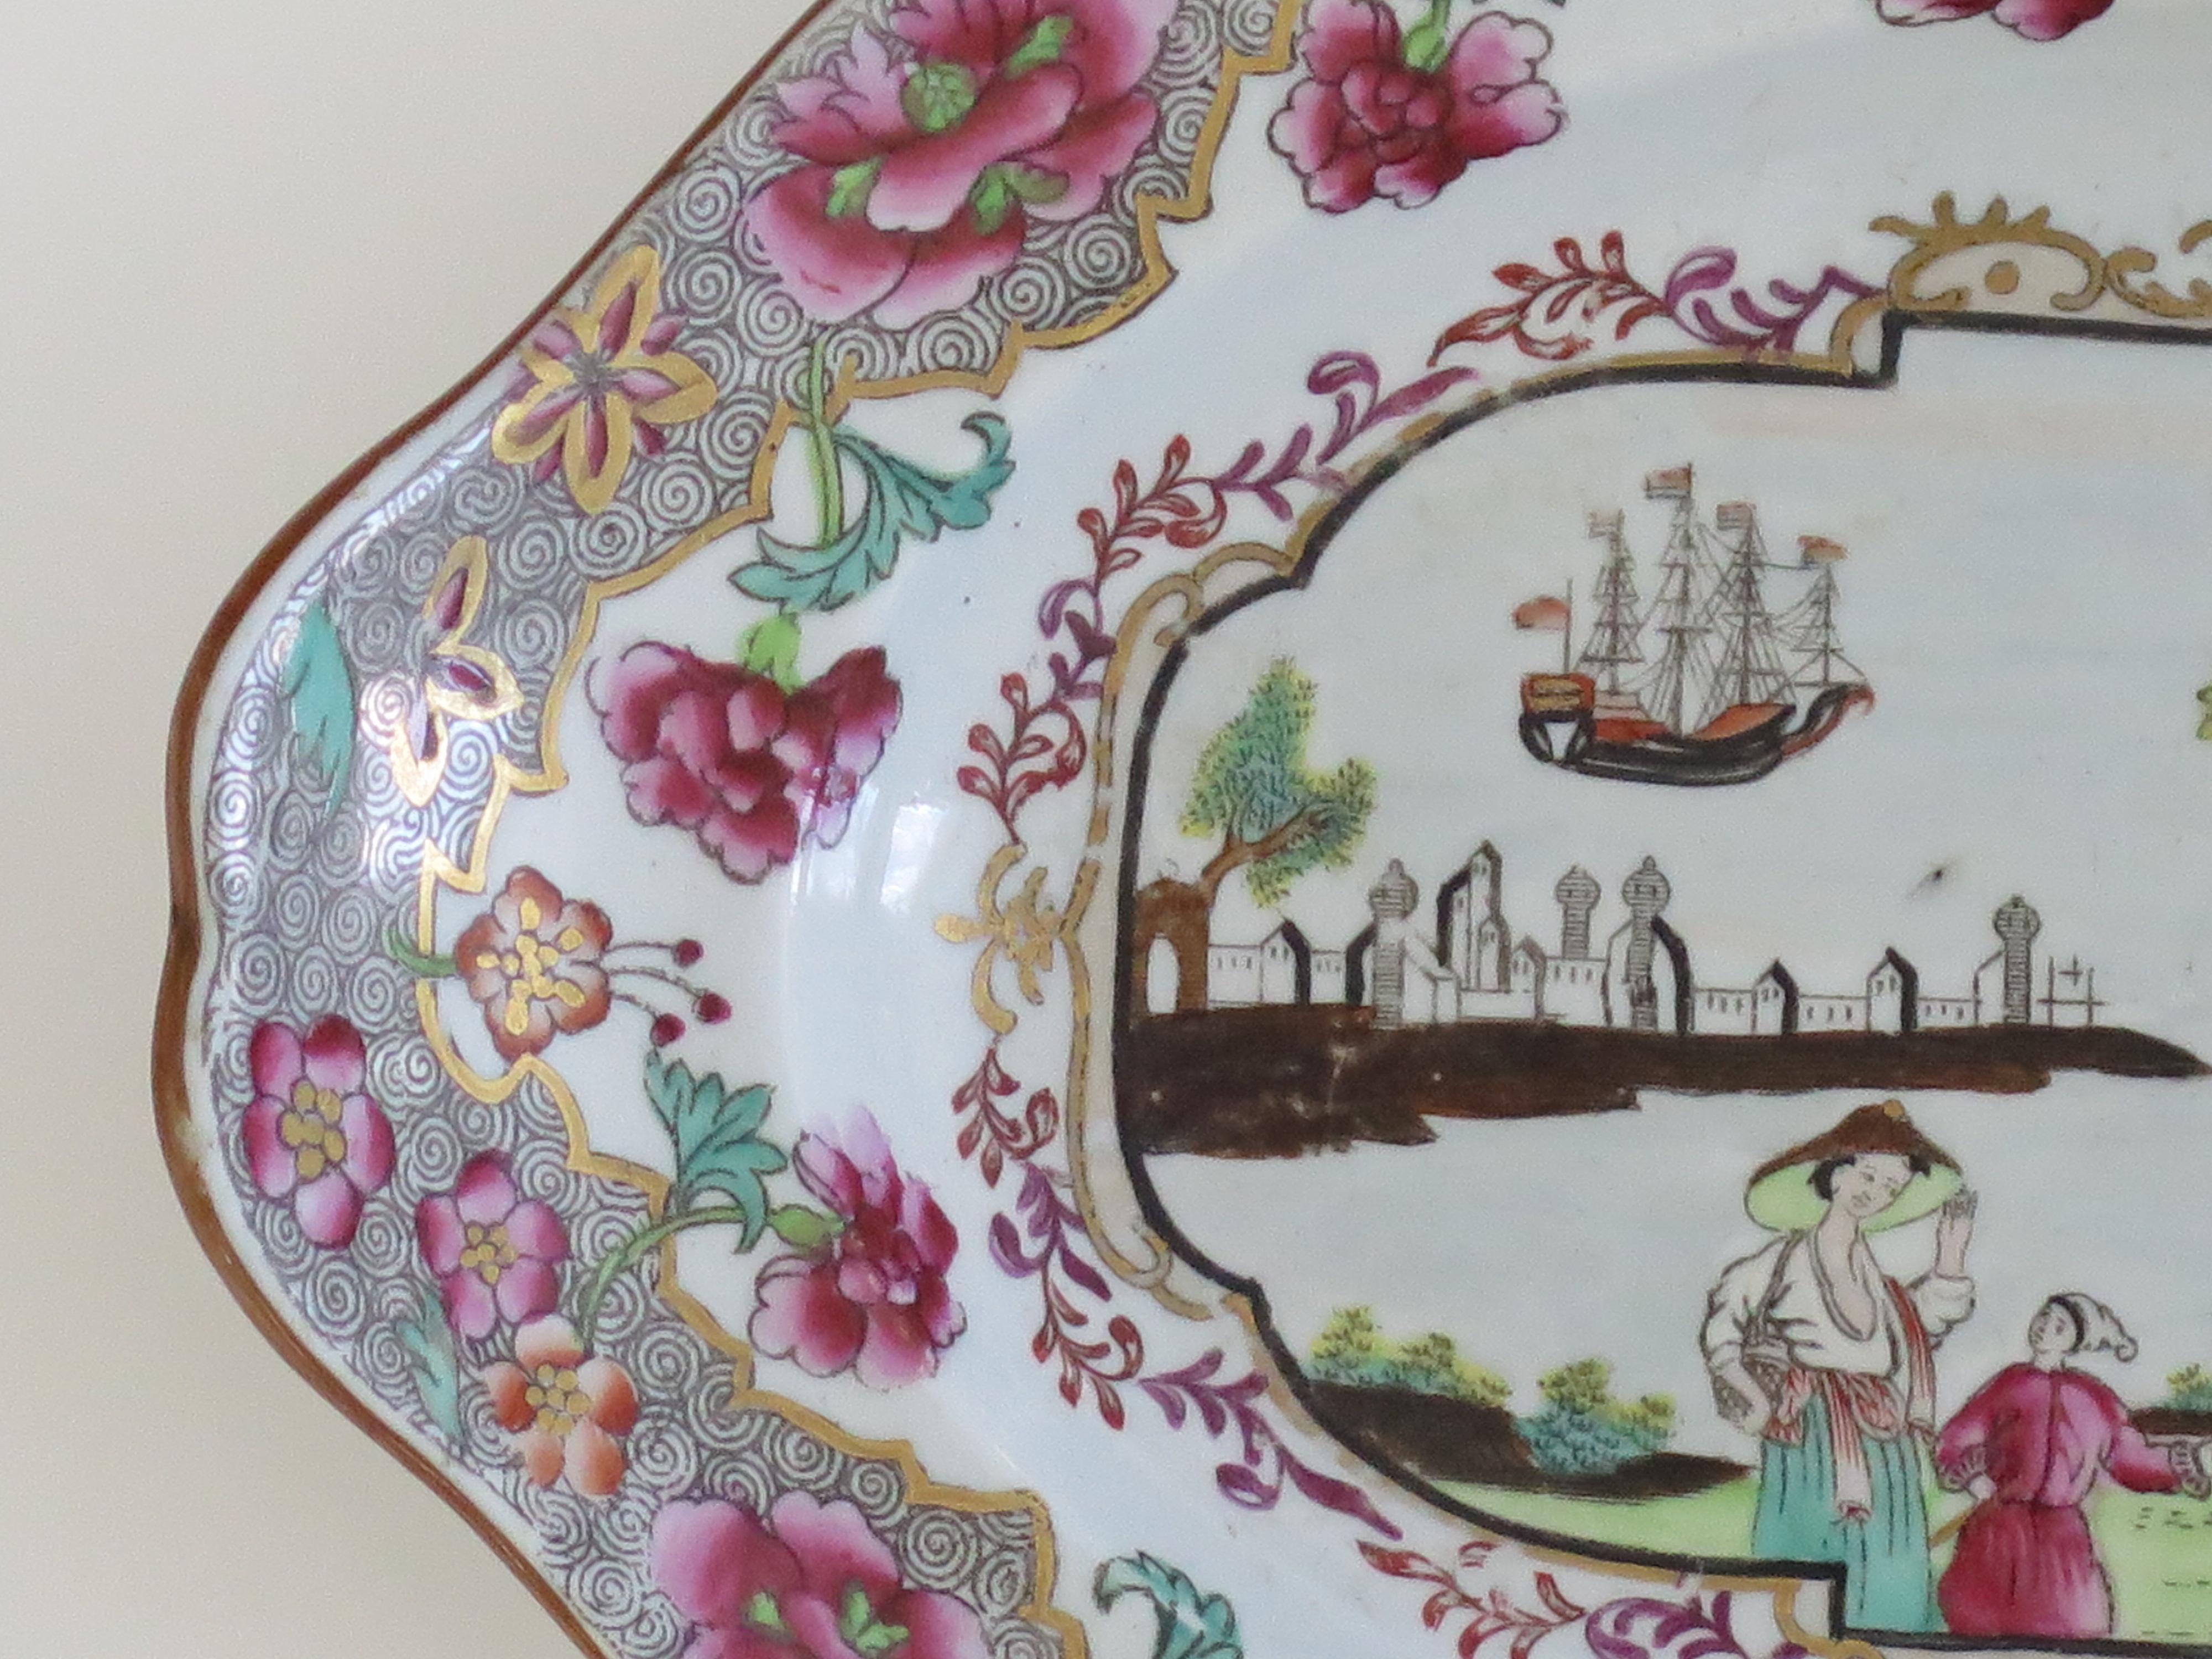 English Spode Stone China Small Serving Dish in Ship Pattern 3068, circa 1810 For Sale